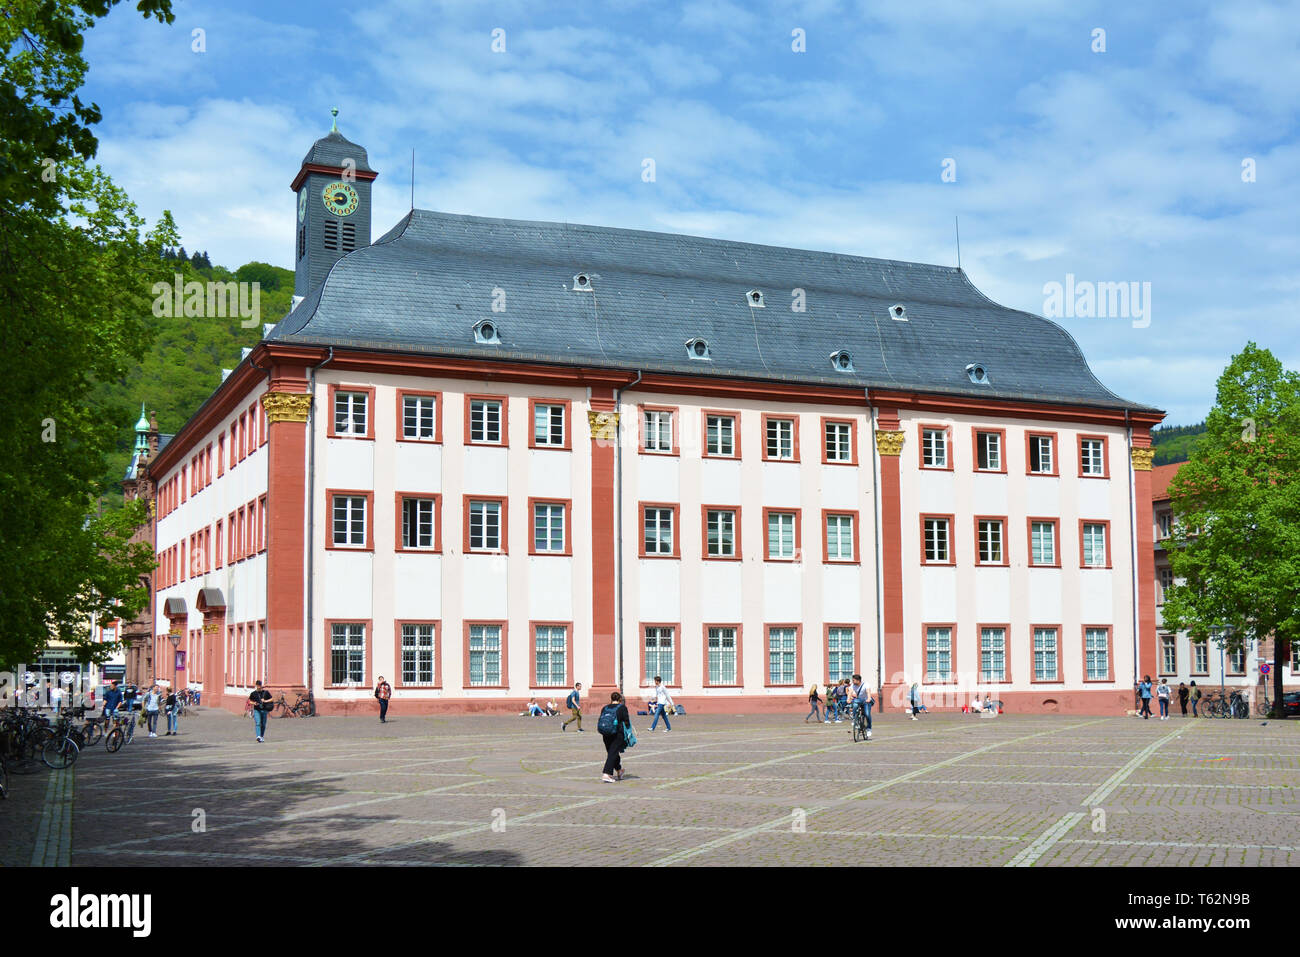 Full view of old historical university building that is now used as meeting or concert hall in city center of Heidelberg in Germany Stock Photo